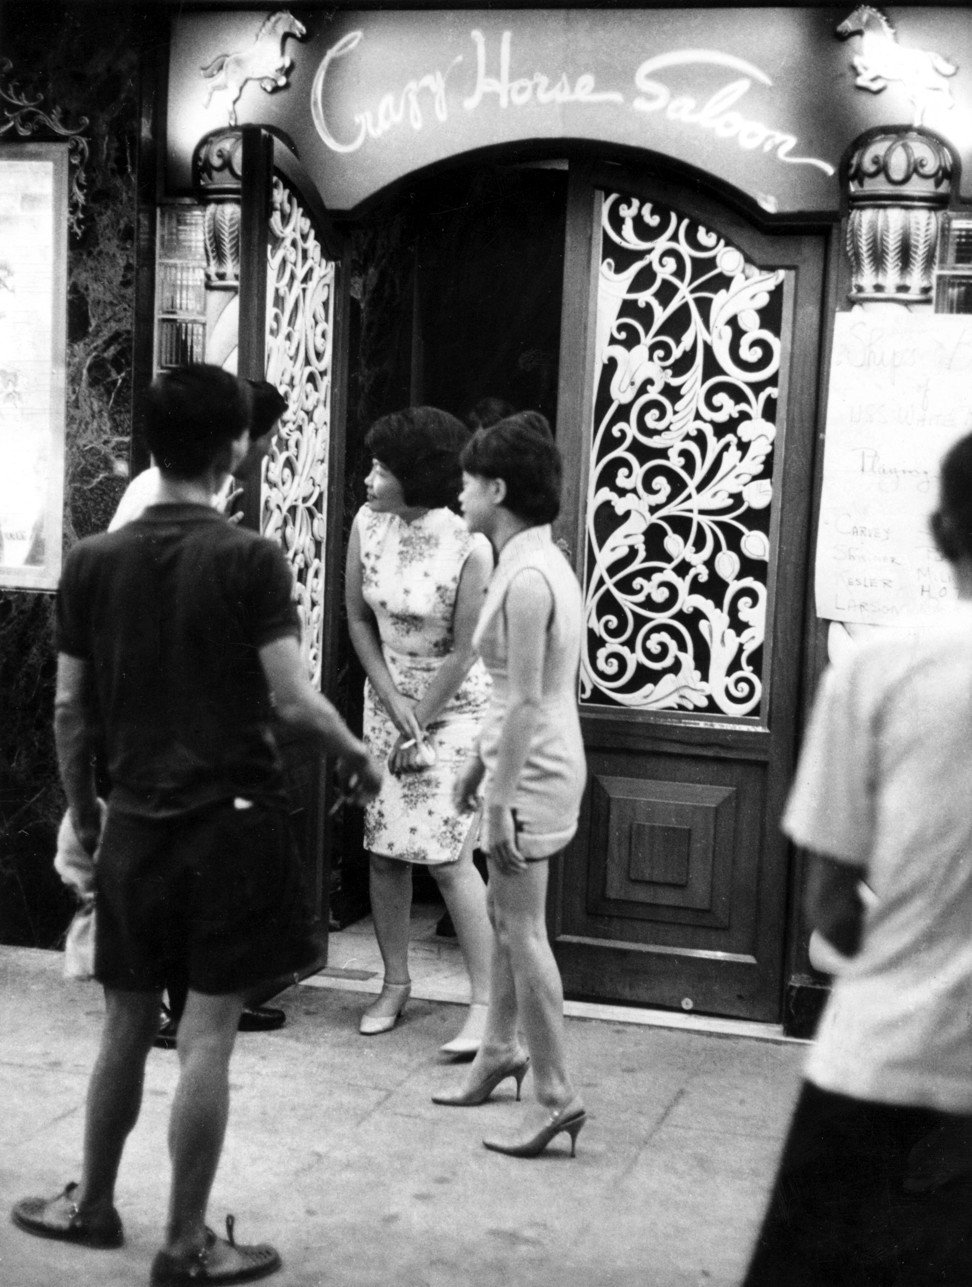 The Crazy Horse Saloon in Wan Chai in 1964. Photo: SCMP